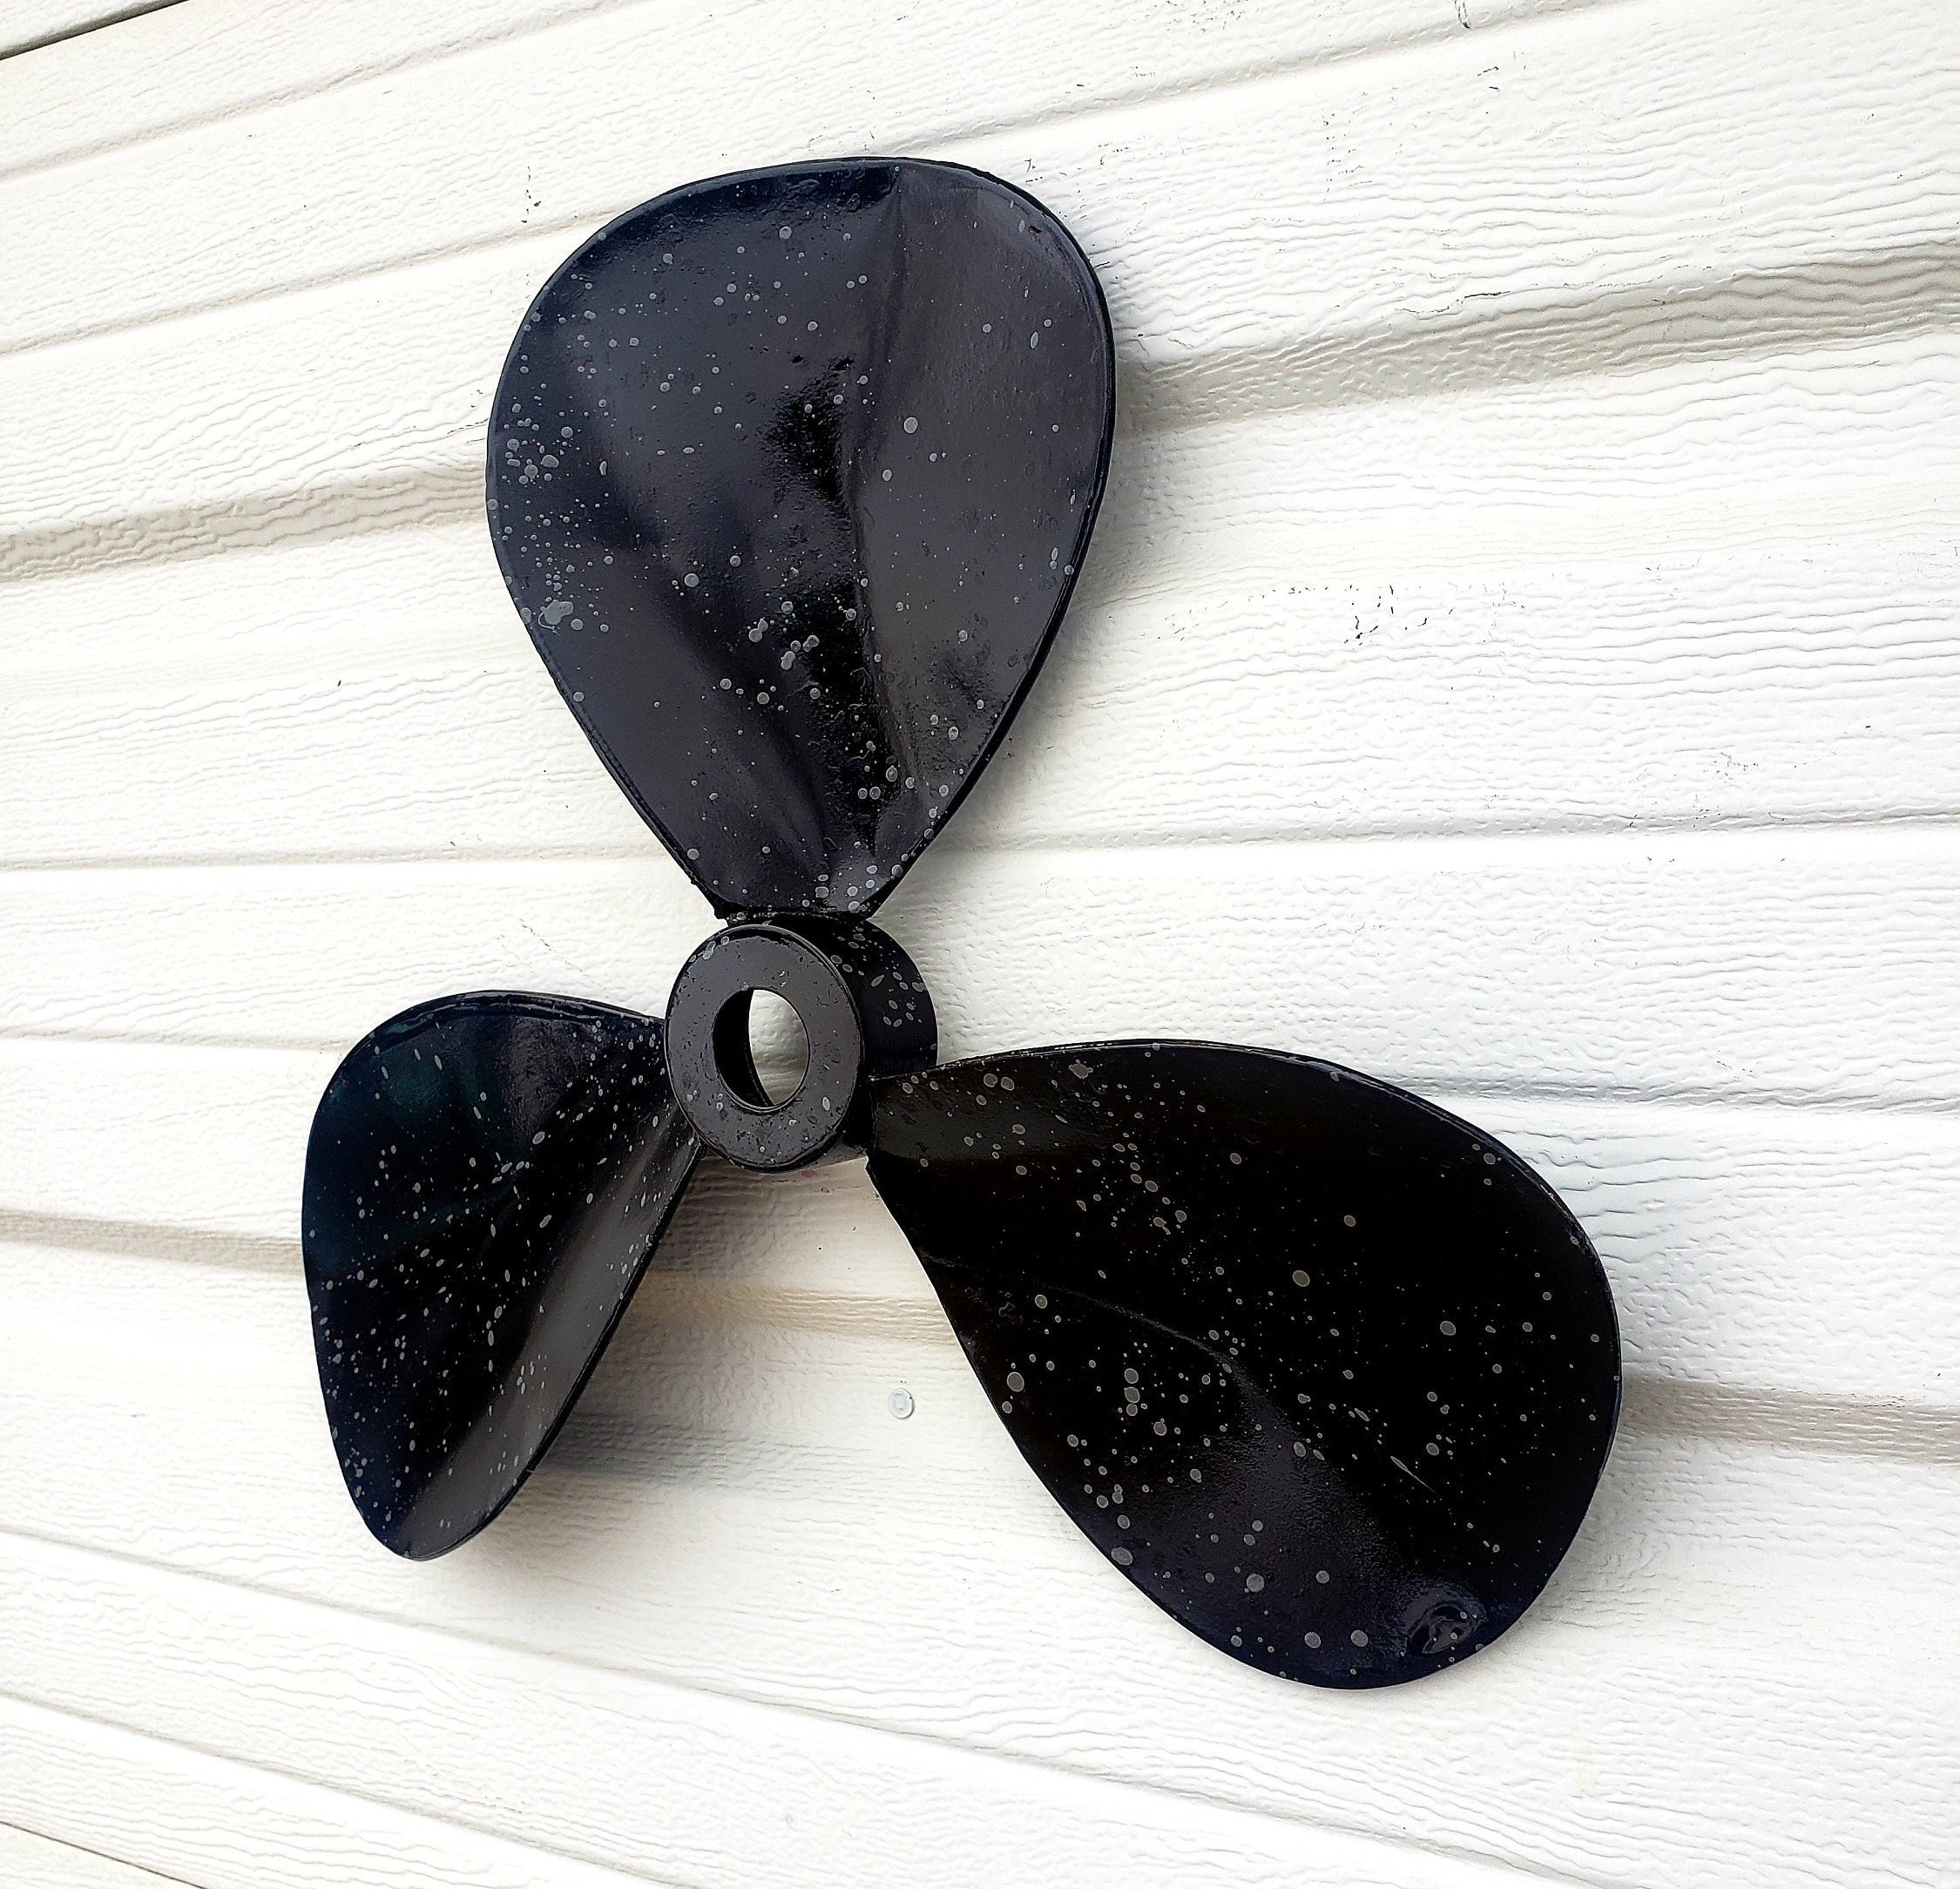 Nautical Decor Details about   Set of 2 Boat Propellers Wall Art Sculptures Distressed Metal 